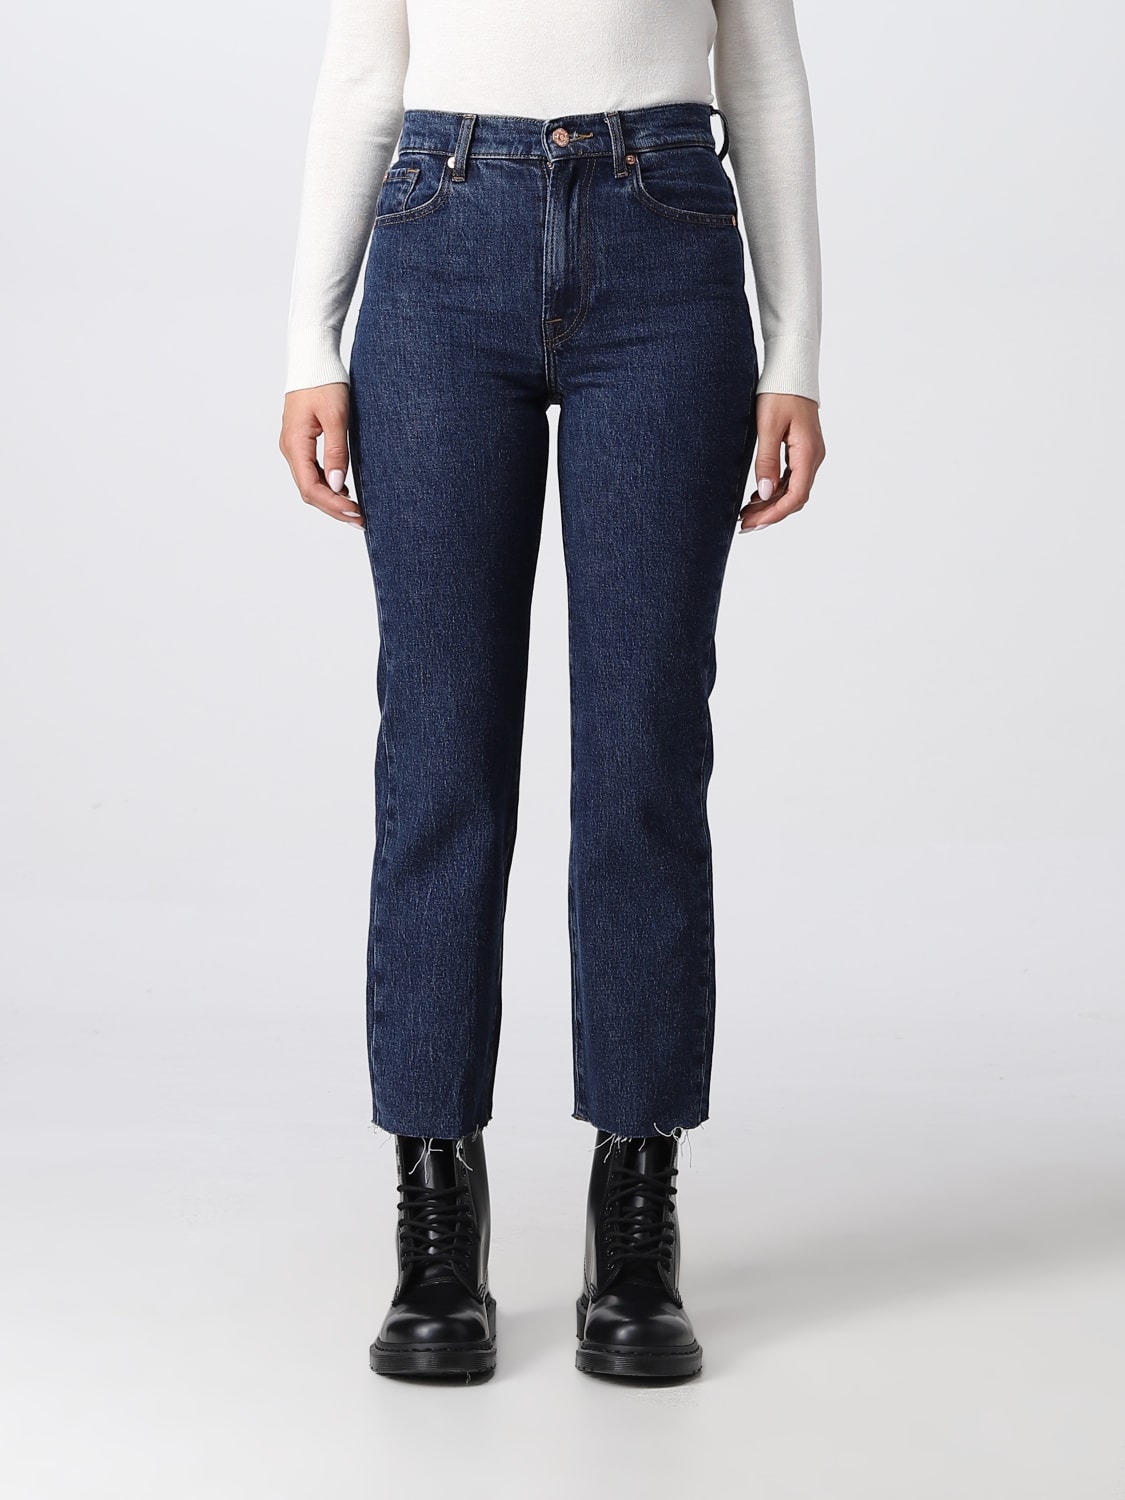 7 All Mankind jeans for - Blue | 7 For All Mankind jeans JSSTC100UC online at GIGLIO.COM